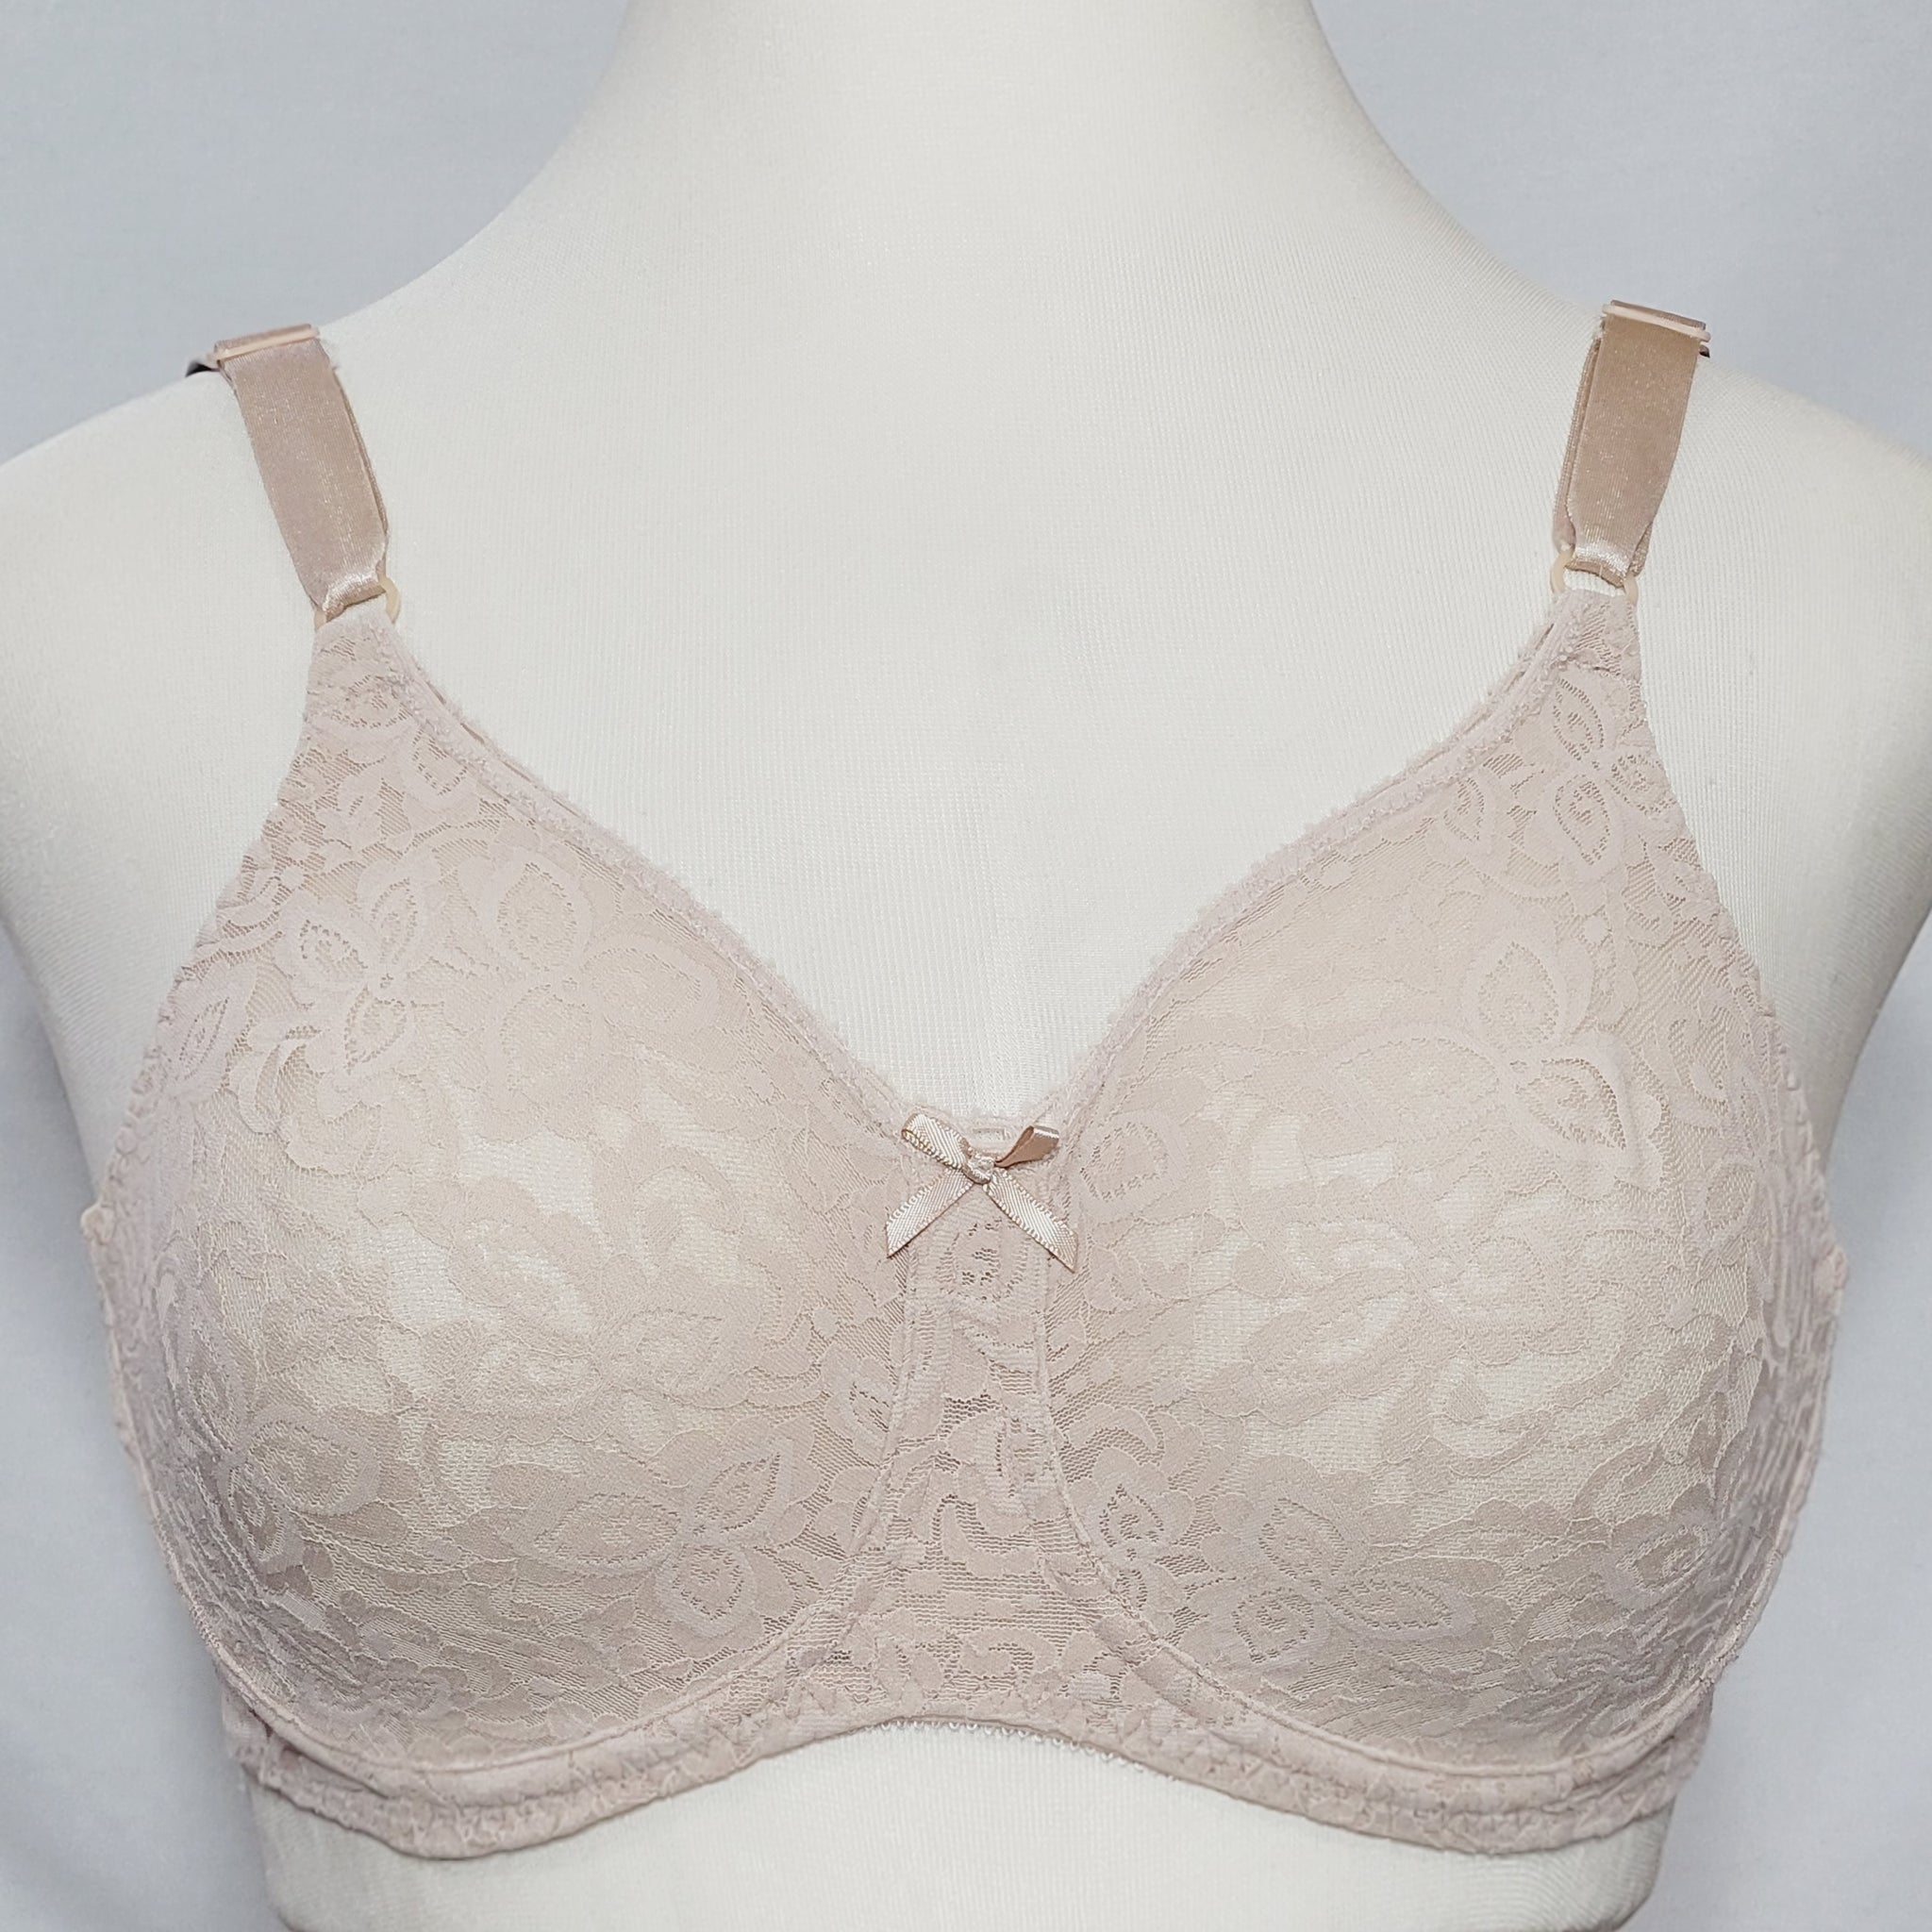 Le Mystere Bra 36E Womens Nude Lace Trim Full Coverage Hook and